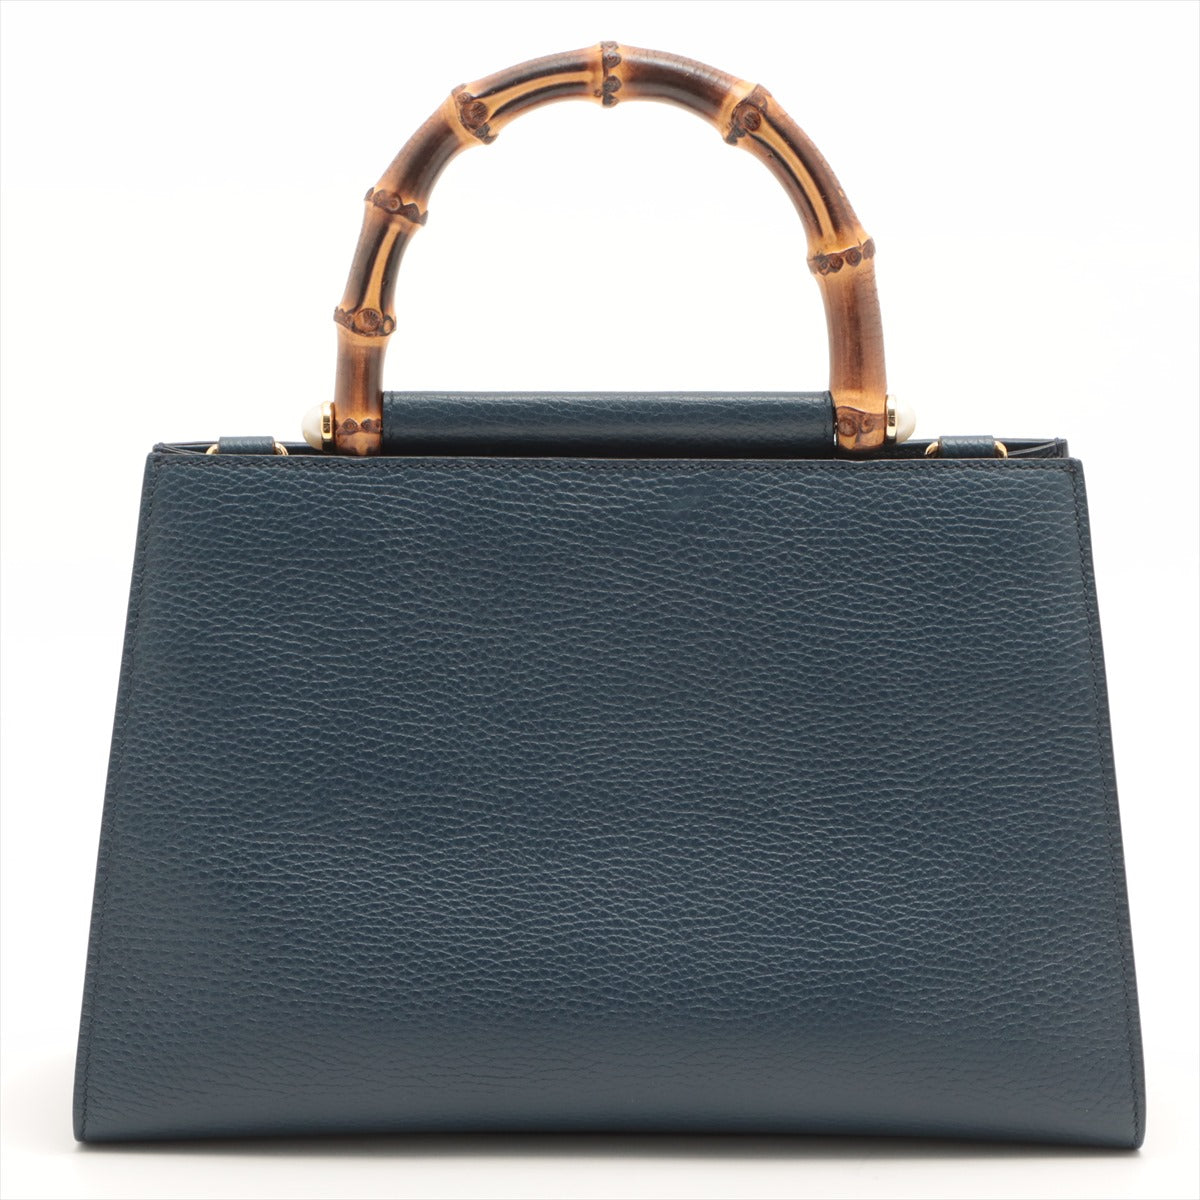 Gucci Bamboo Nymphair Leather Handbag Blue 459076